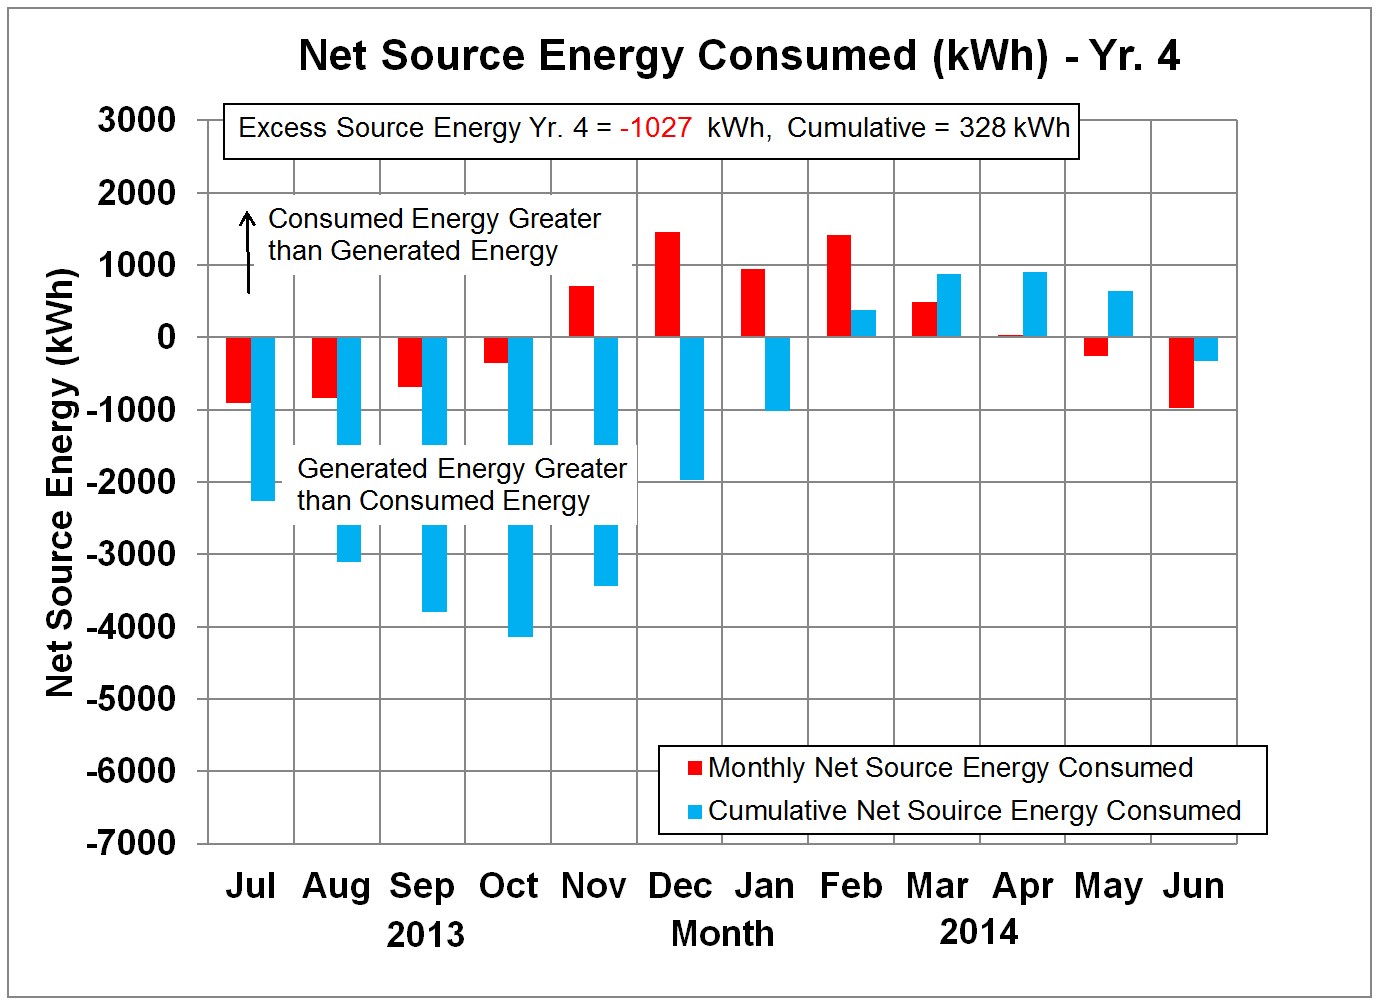 Net Source Energy in kWh - Yr. 4